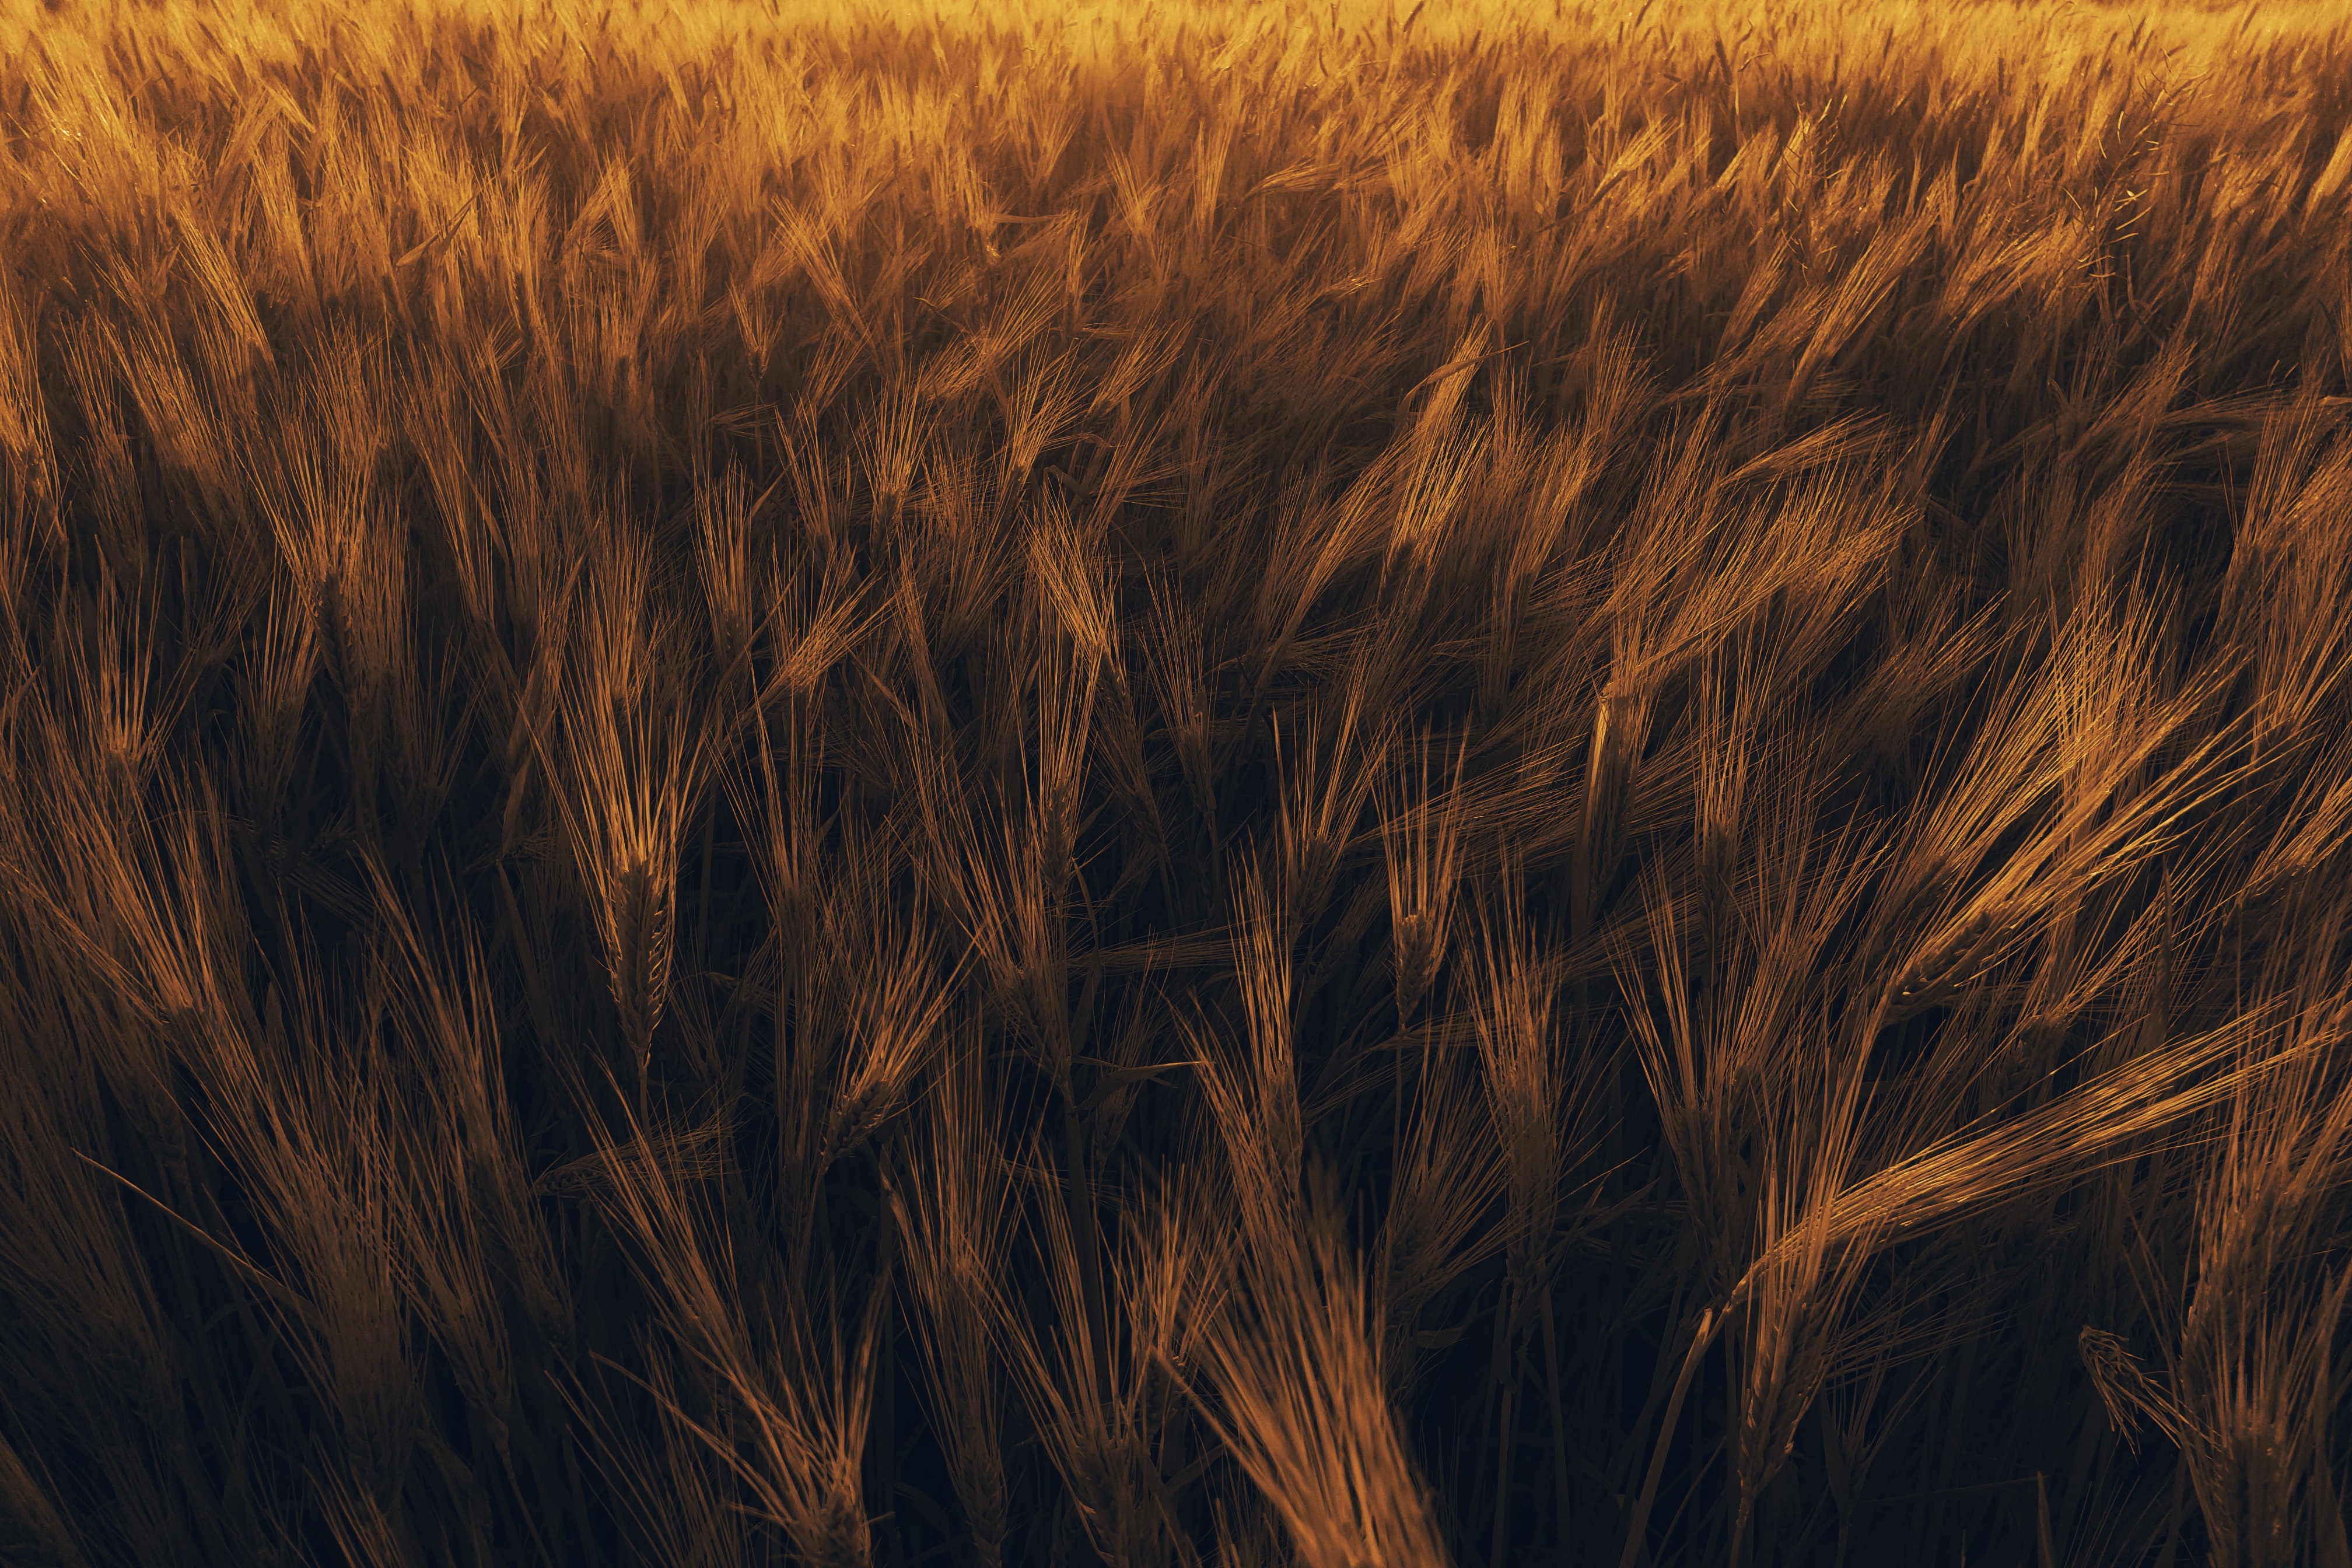 Windows Backgrounds wheat, nature, plant, field, ears, spikes